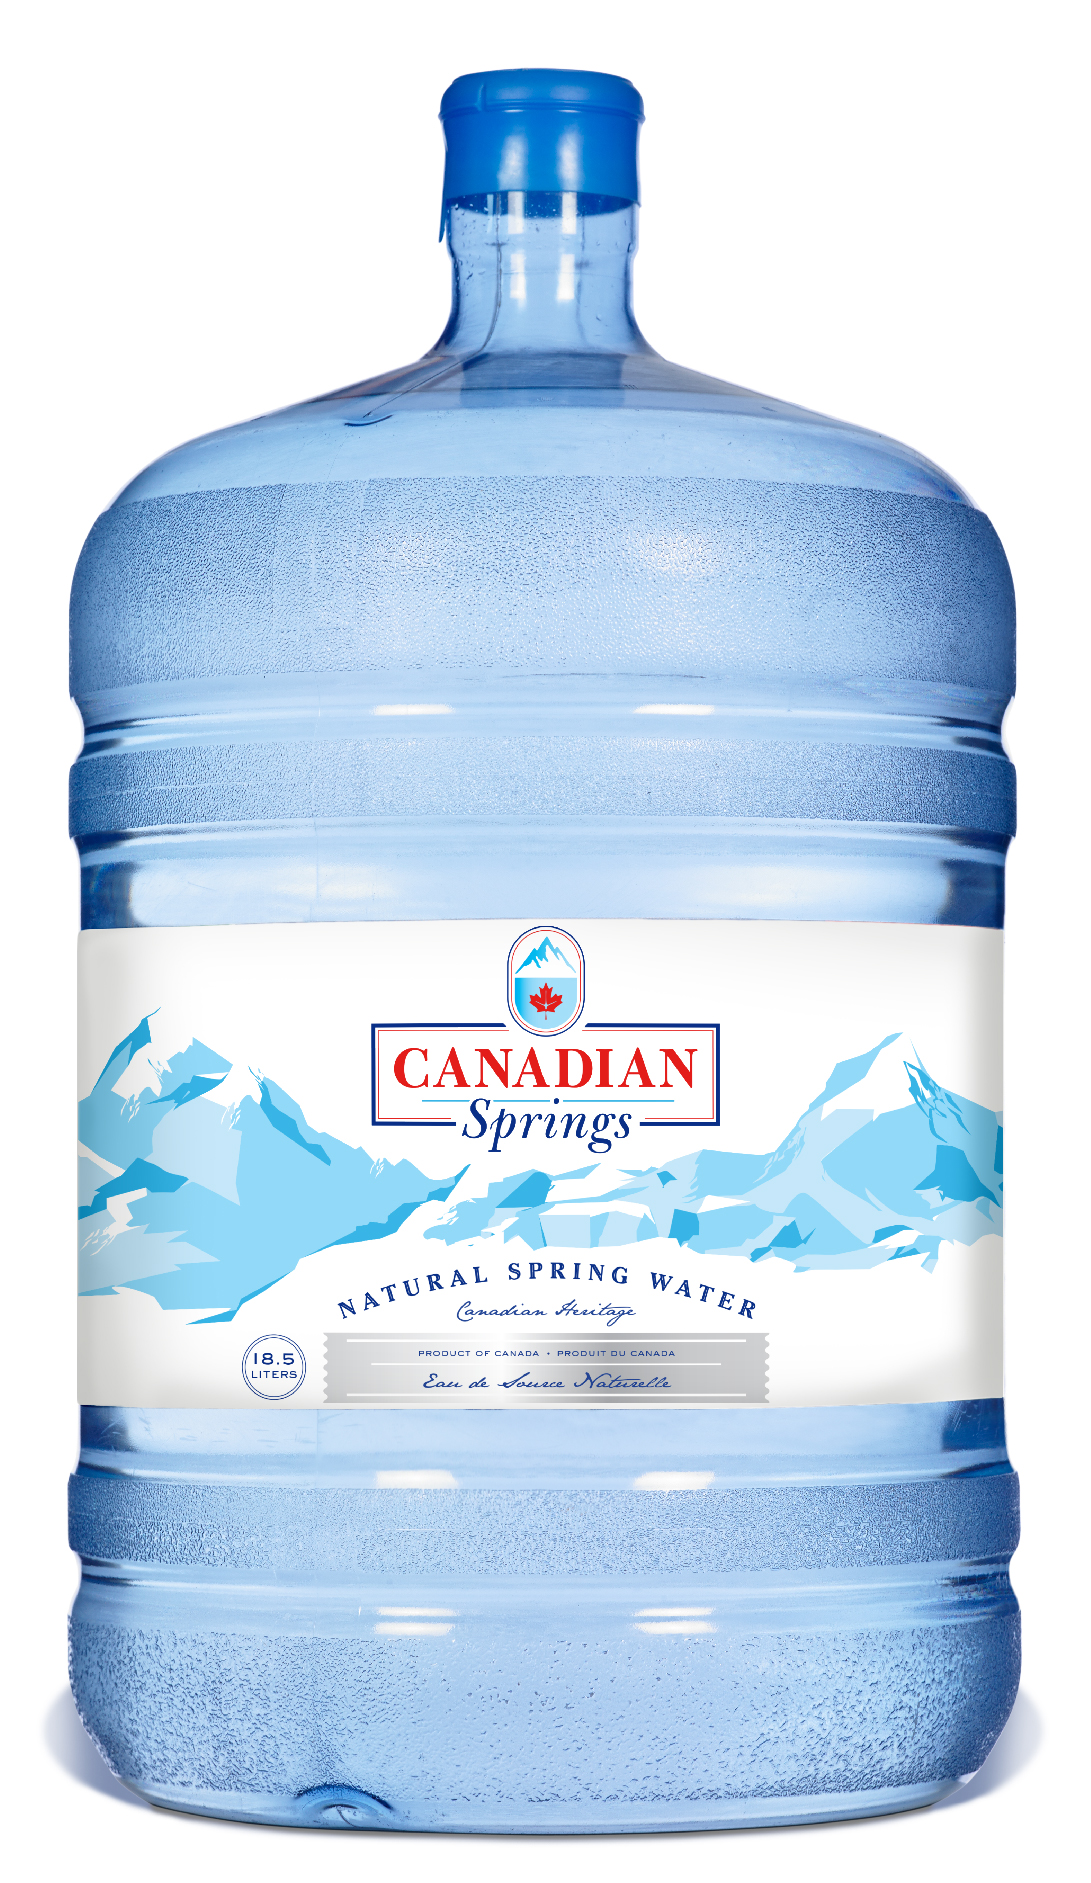 Logo design and illustration for Canadian Springs water.